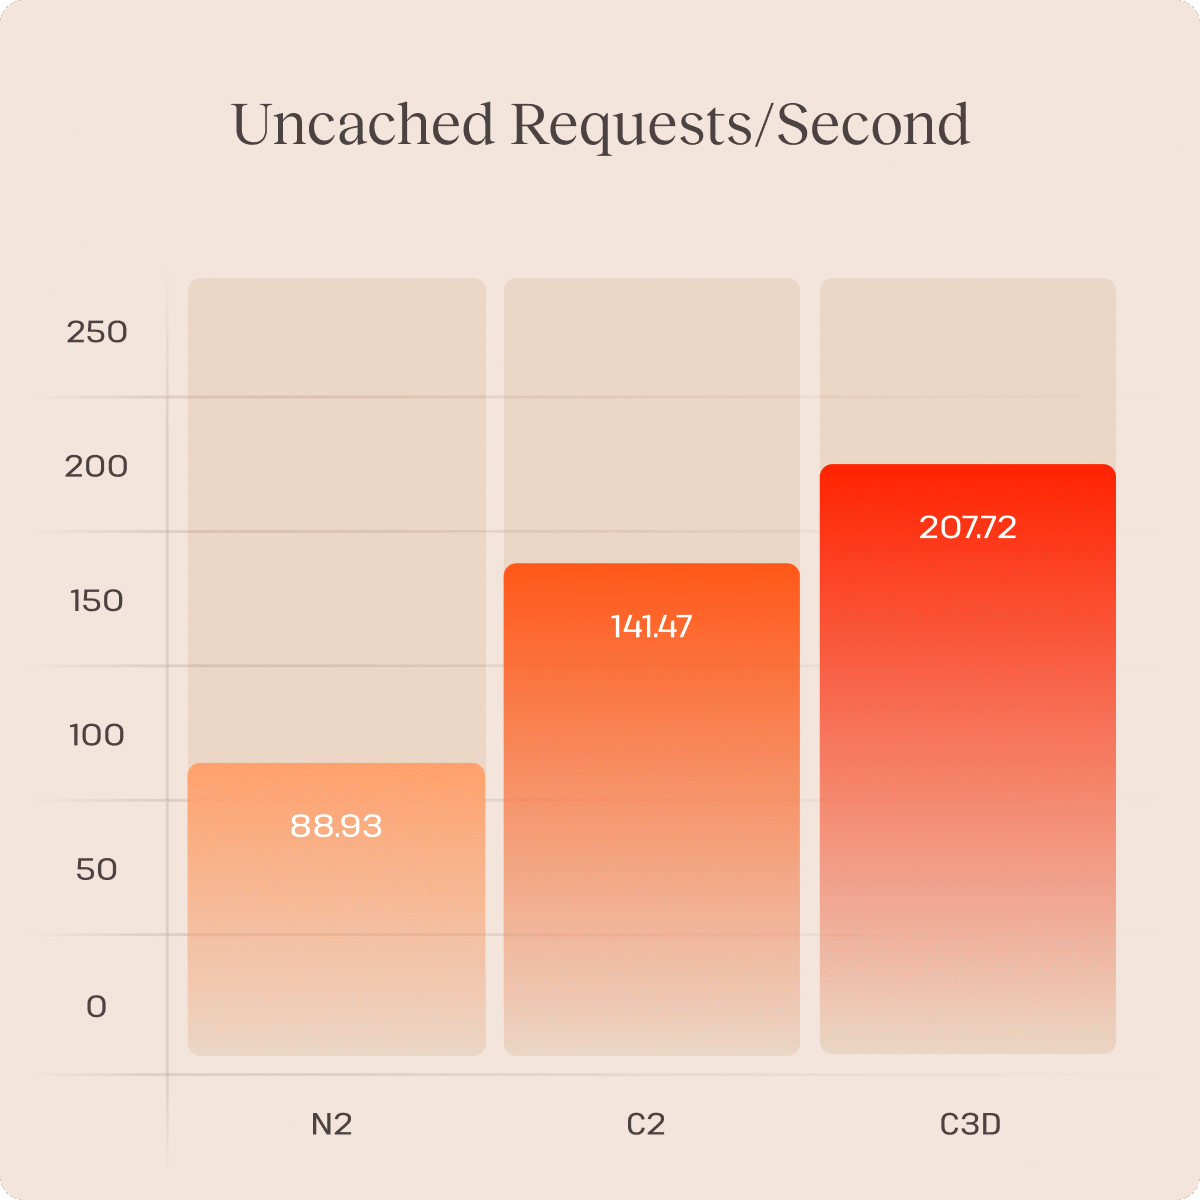 Chart showing results of uncached page-request testing for N2, C2, and C3D virtual machines.